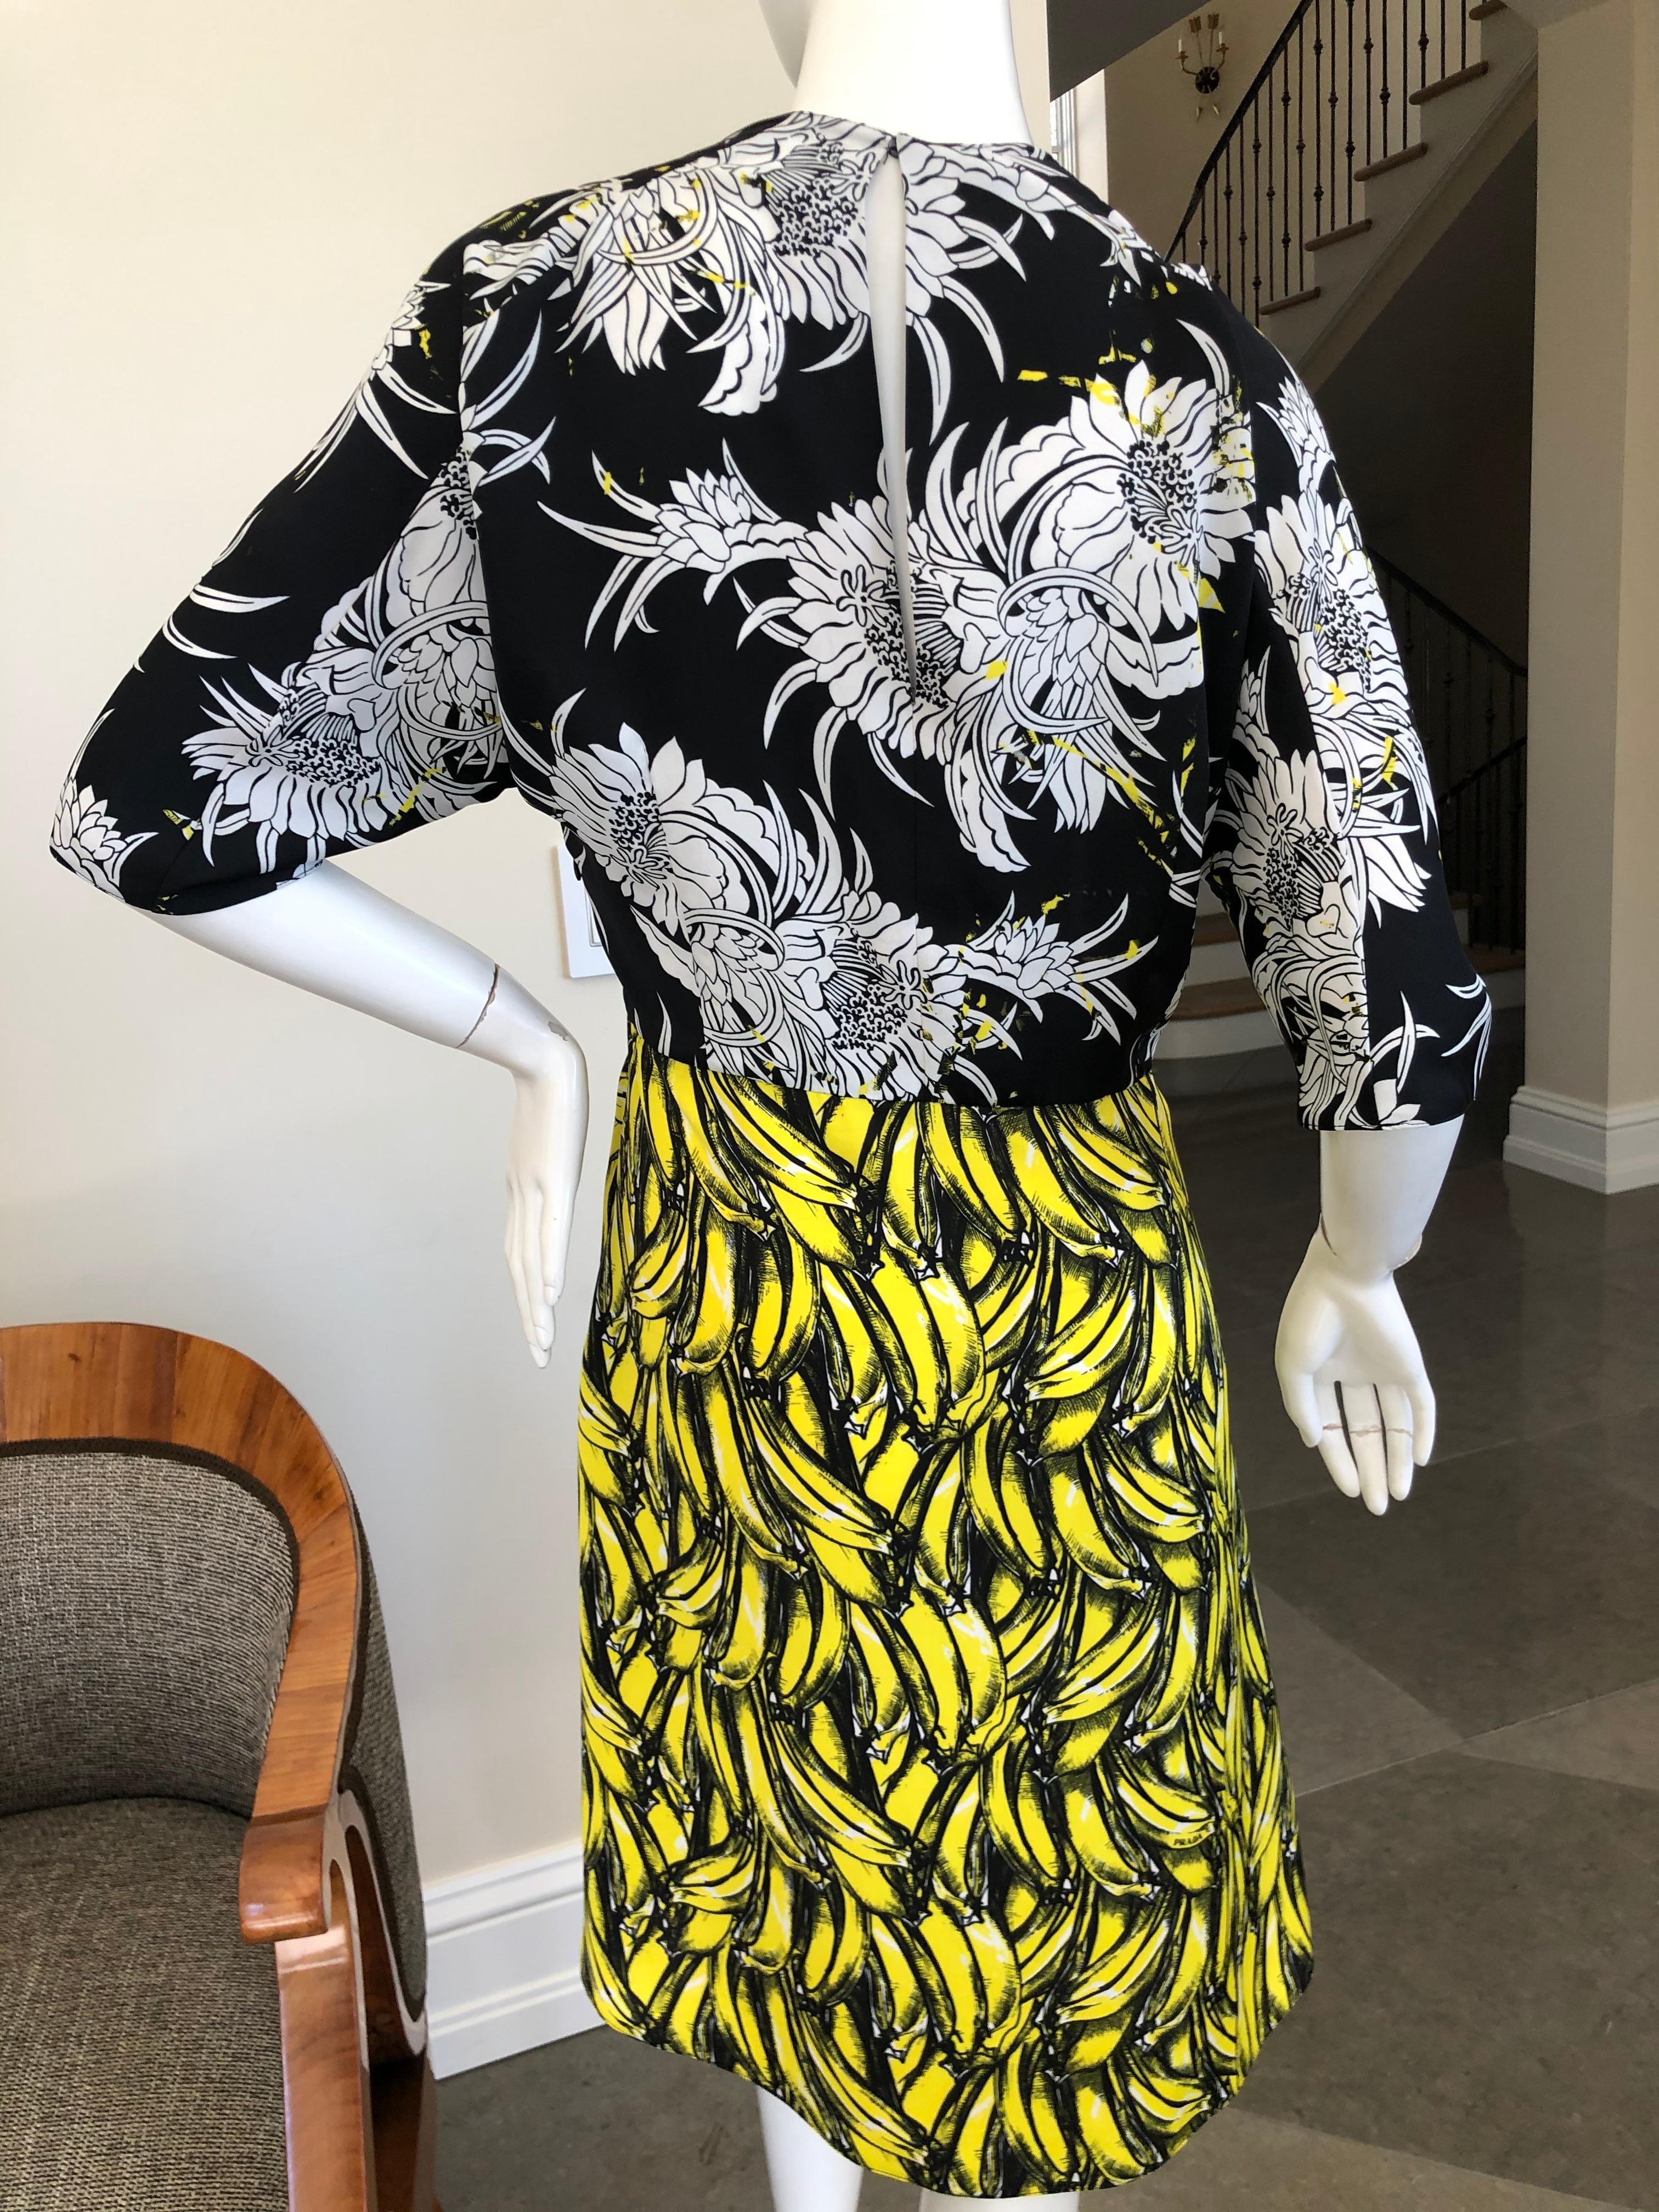 Prada Banana and Dahlia Print Dress with Pleated Accents A/W 2018 For Sale 1